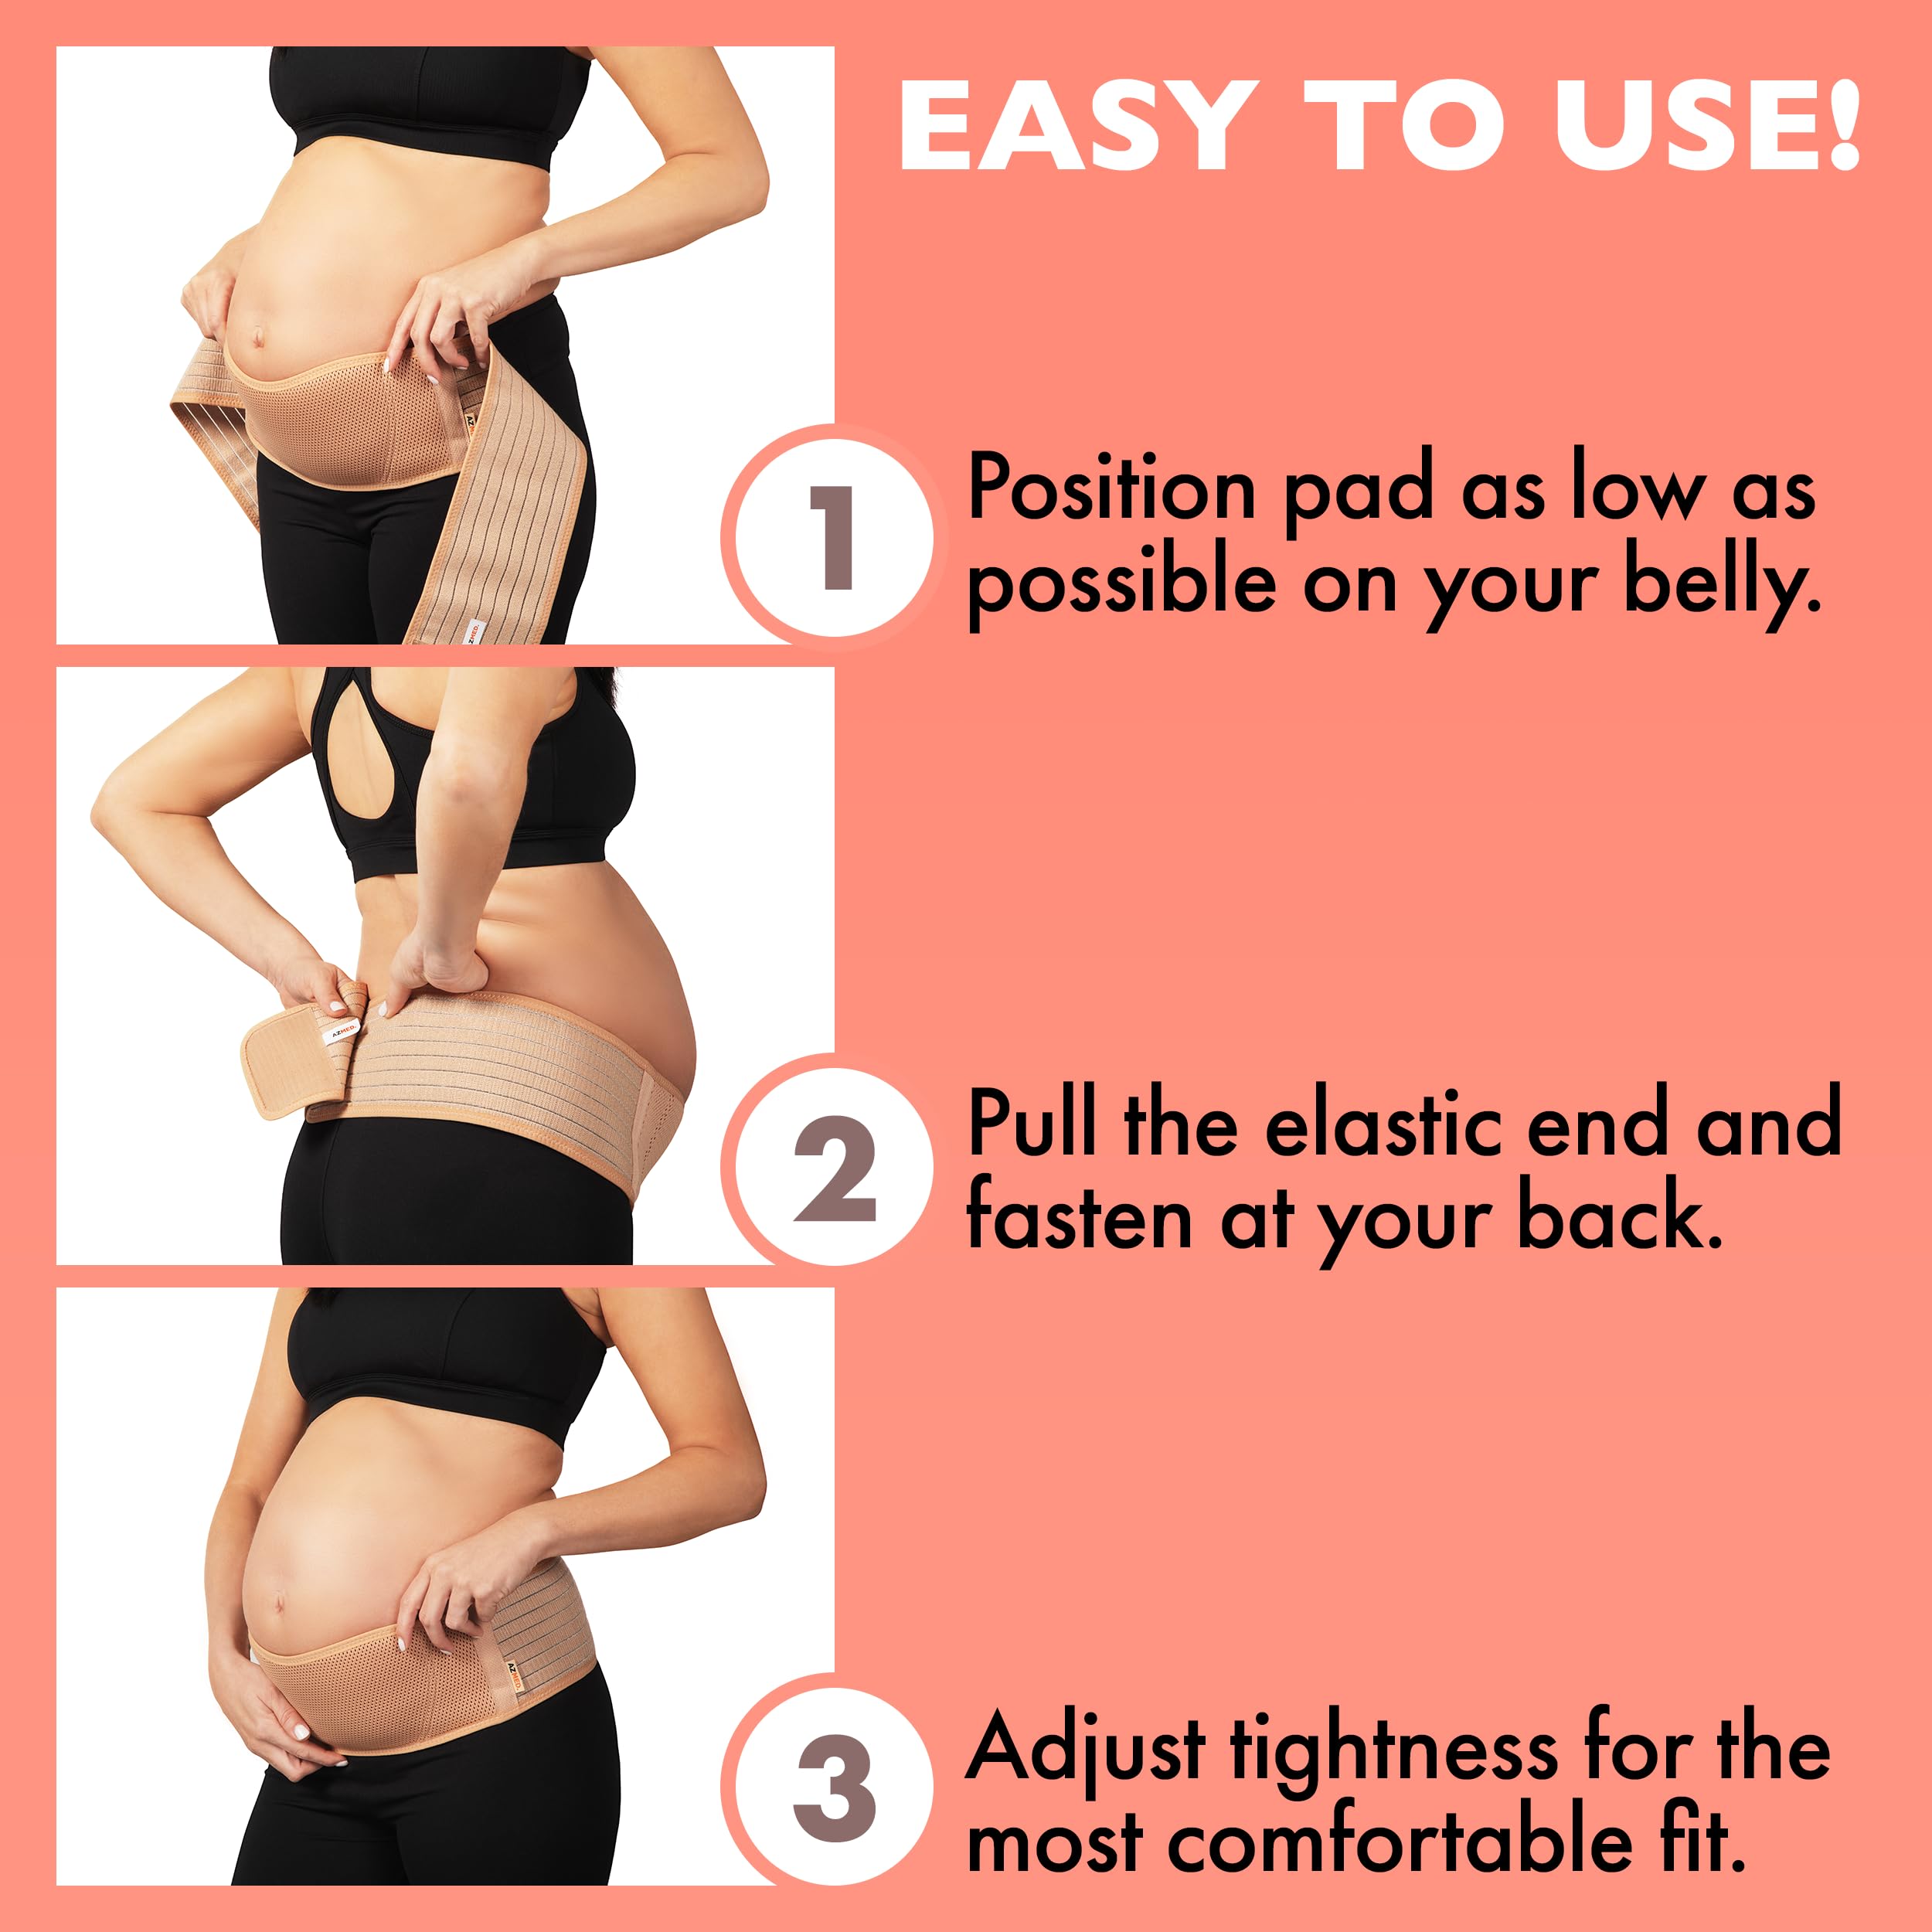 AZMED Maternity Belly Band for Pregnant Women | Pregnancy Must Haves Belly Support Band for Abdomen, Pelvic, Waist, Back Pain | Adjustable Maternity Belt | All Stages of Pregnancy & Postpartum (Beige)